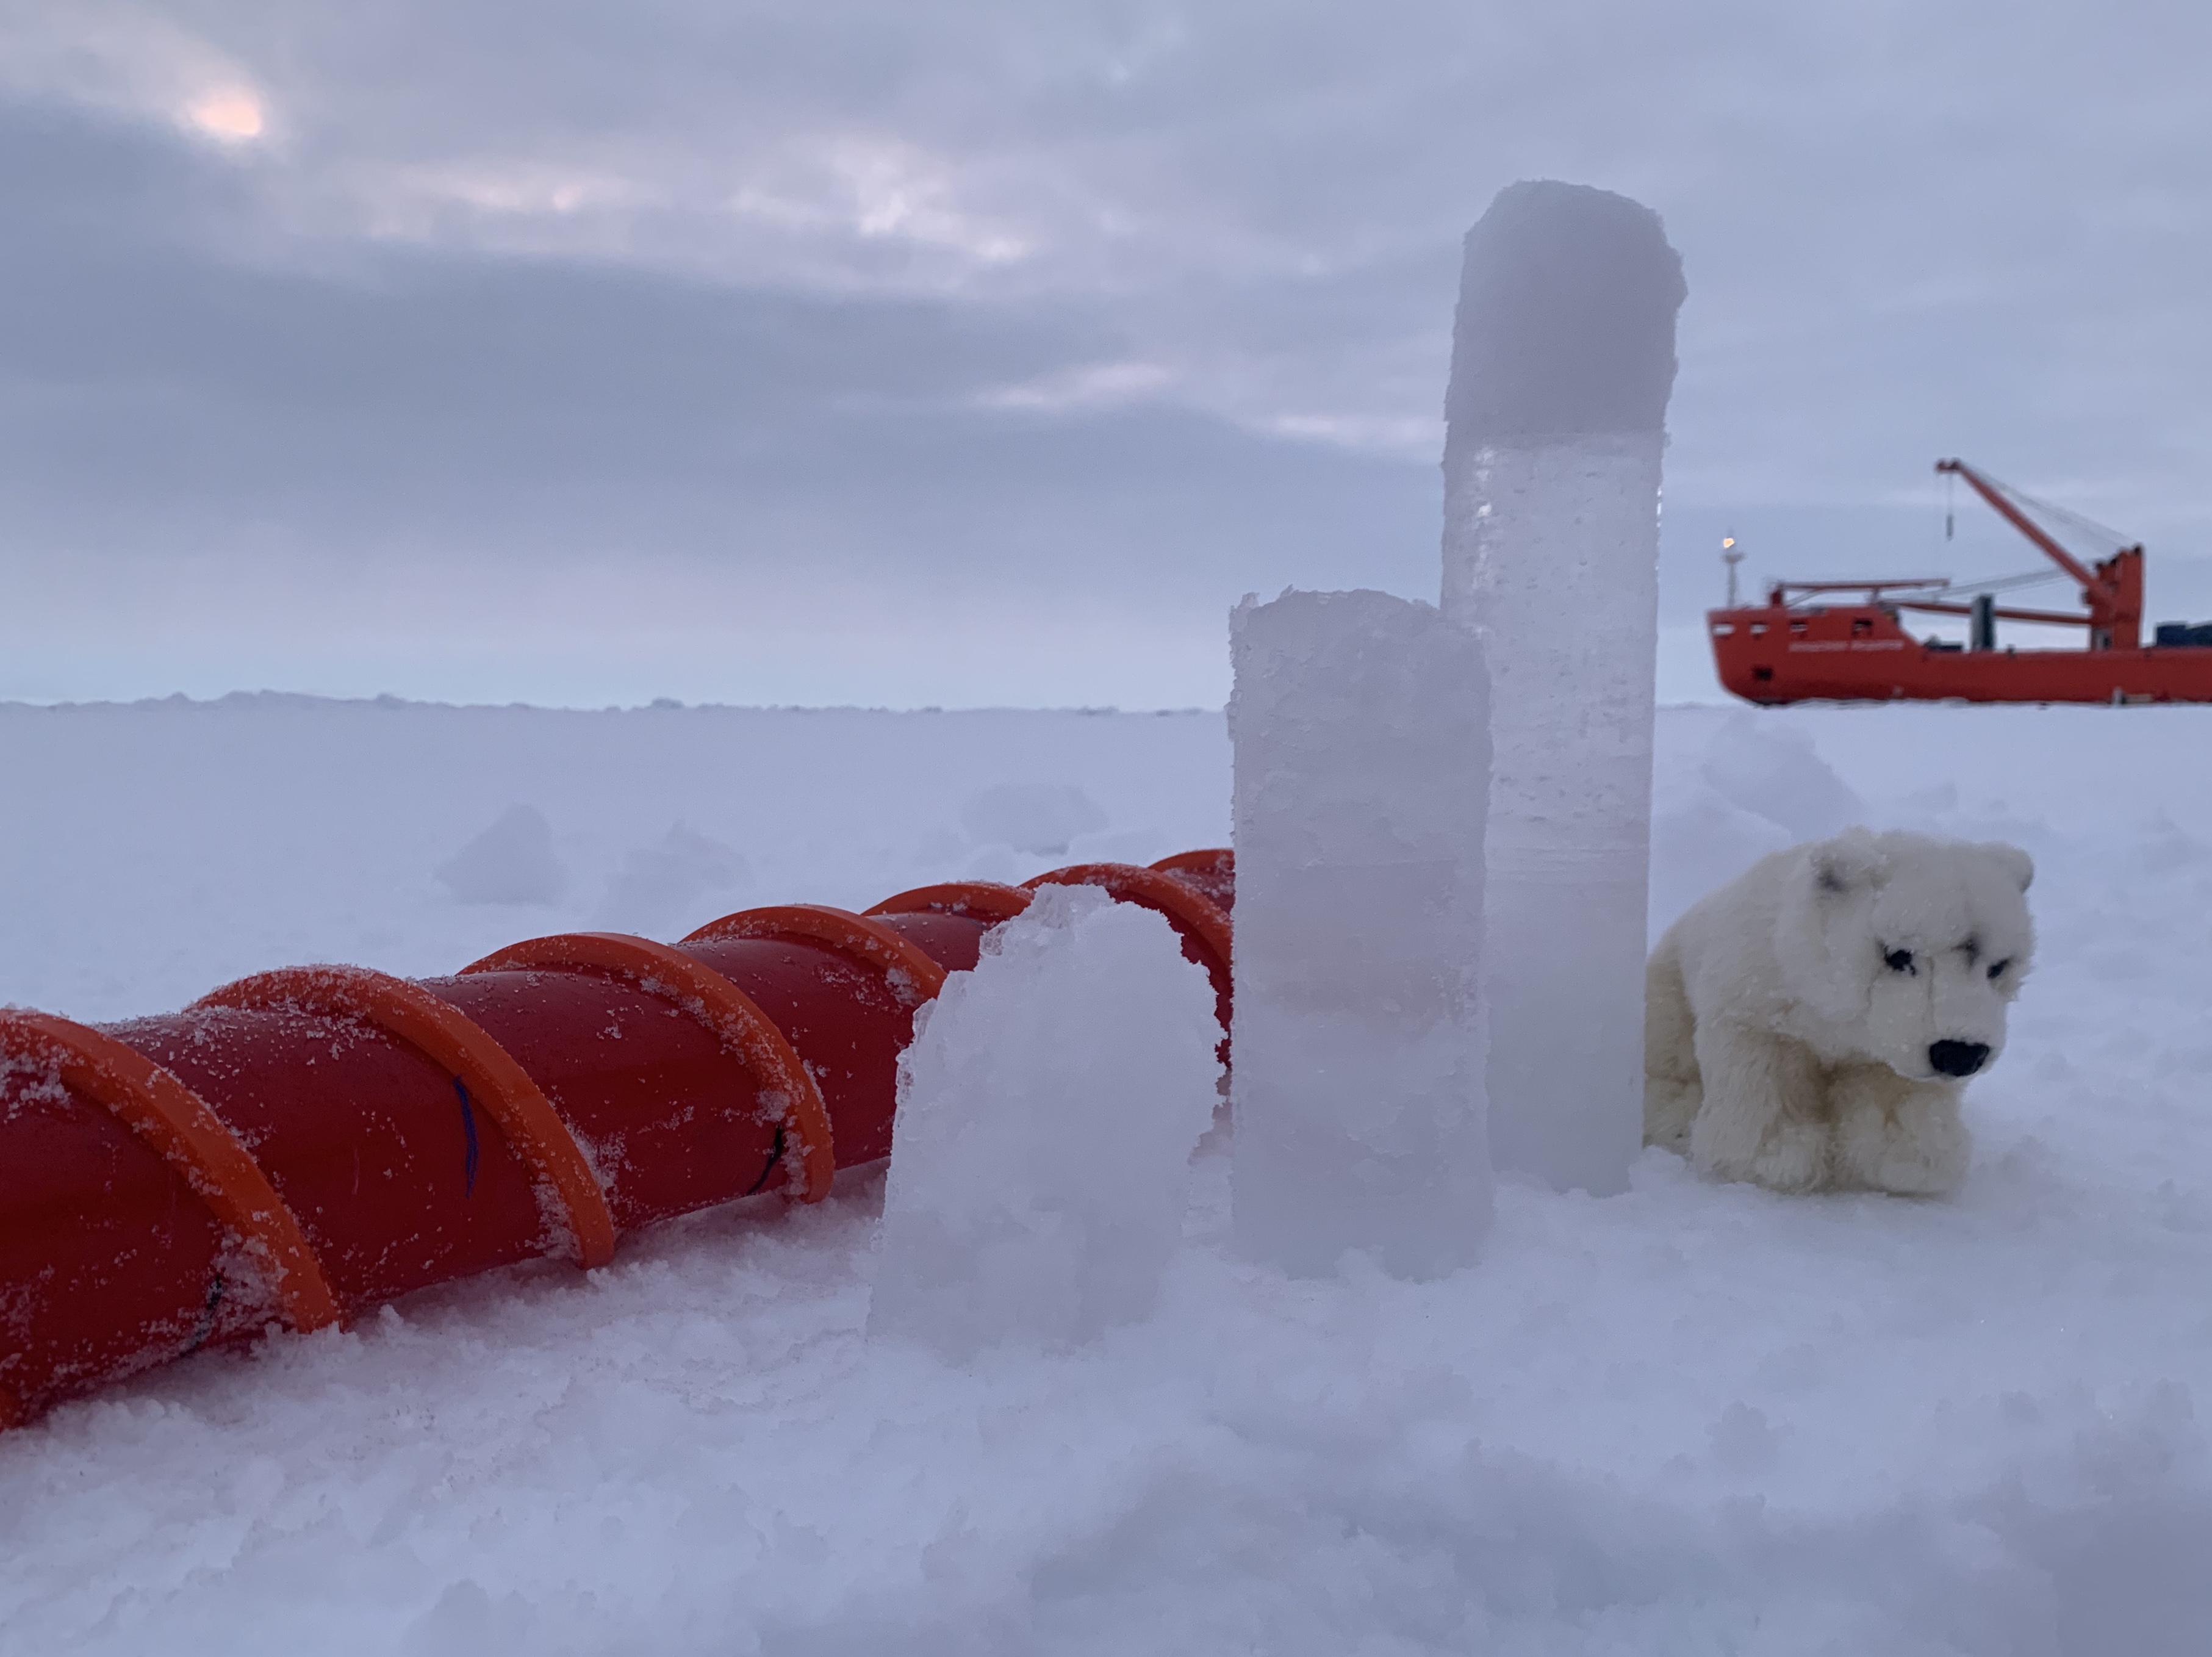 Bjorn, a fuzzy stuffed bear, sits next to sea-ice cores during the MOSAiC expedition